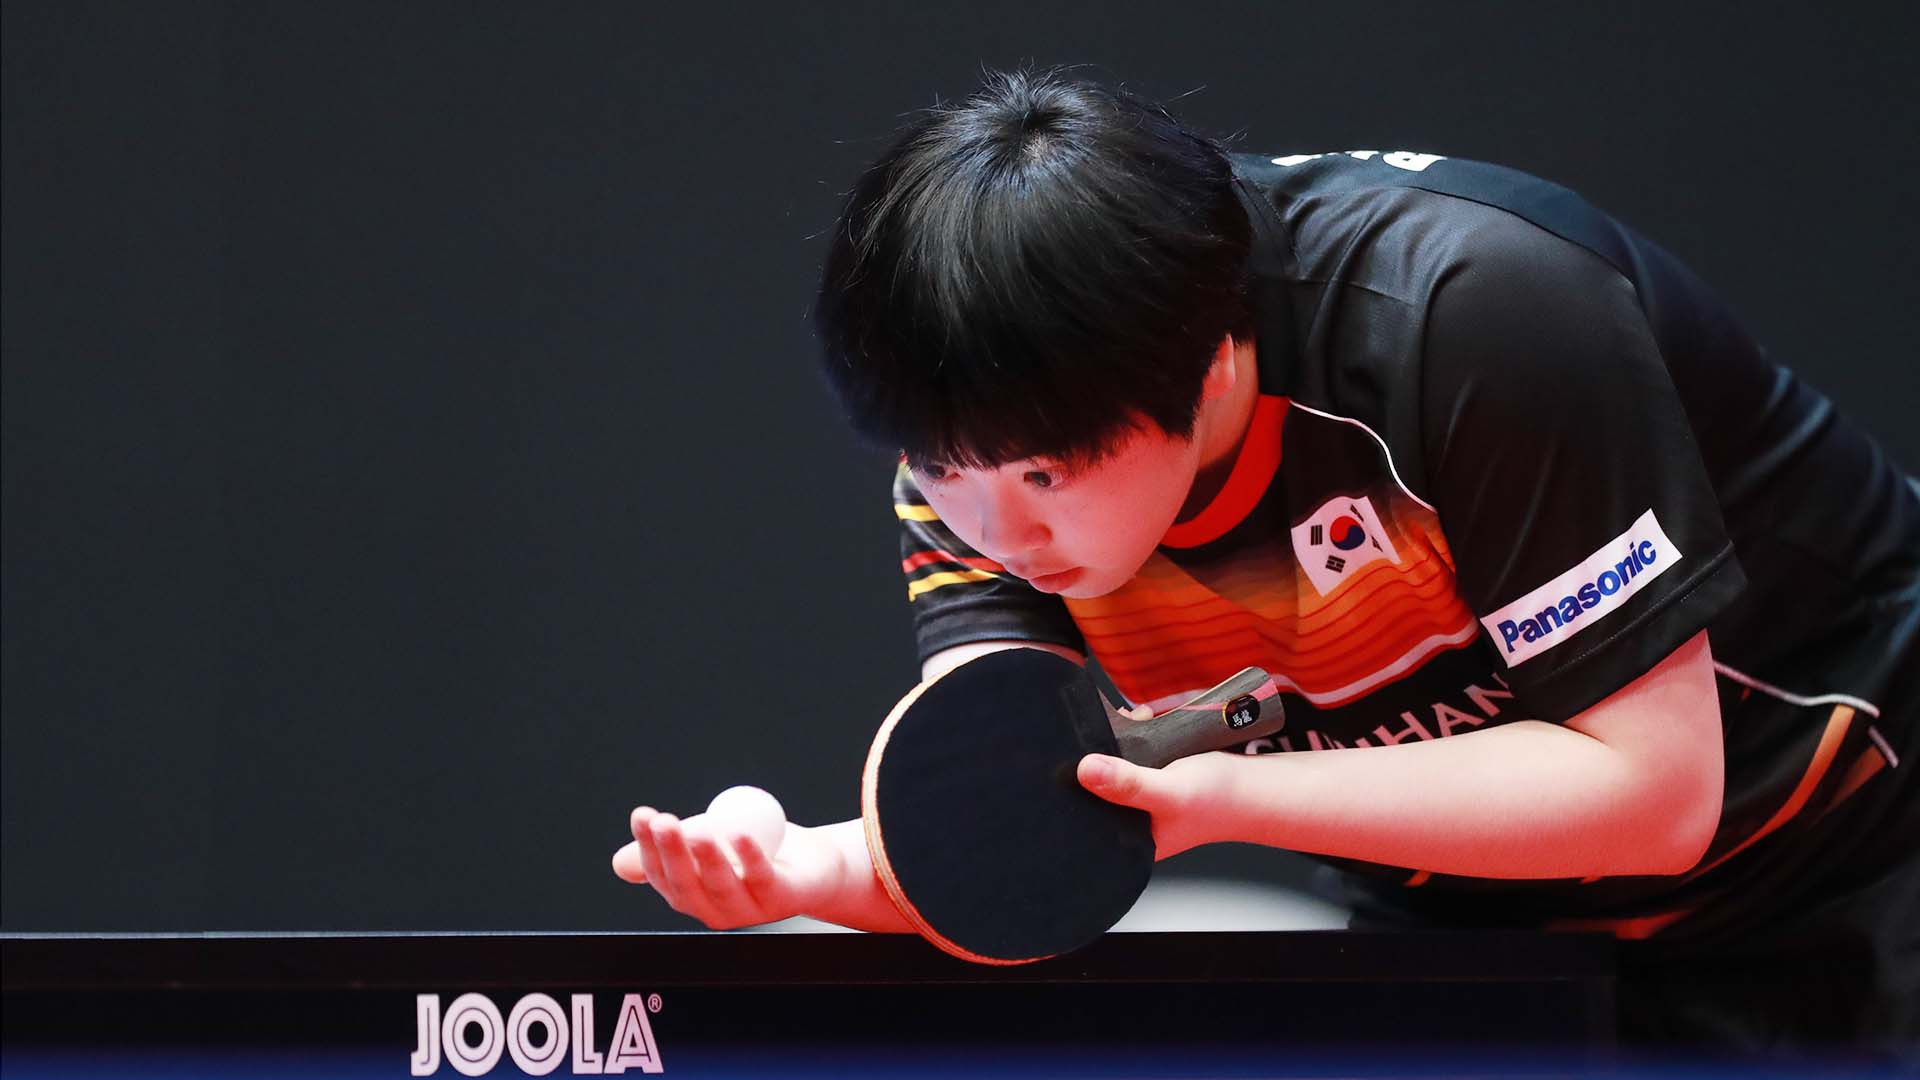 South Korea became the first team to qualify for the quarter-final of the girls' team event at the ITTF World Junior Table Tennis Championships in Bendigo ©ITTF/Rémy Gros